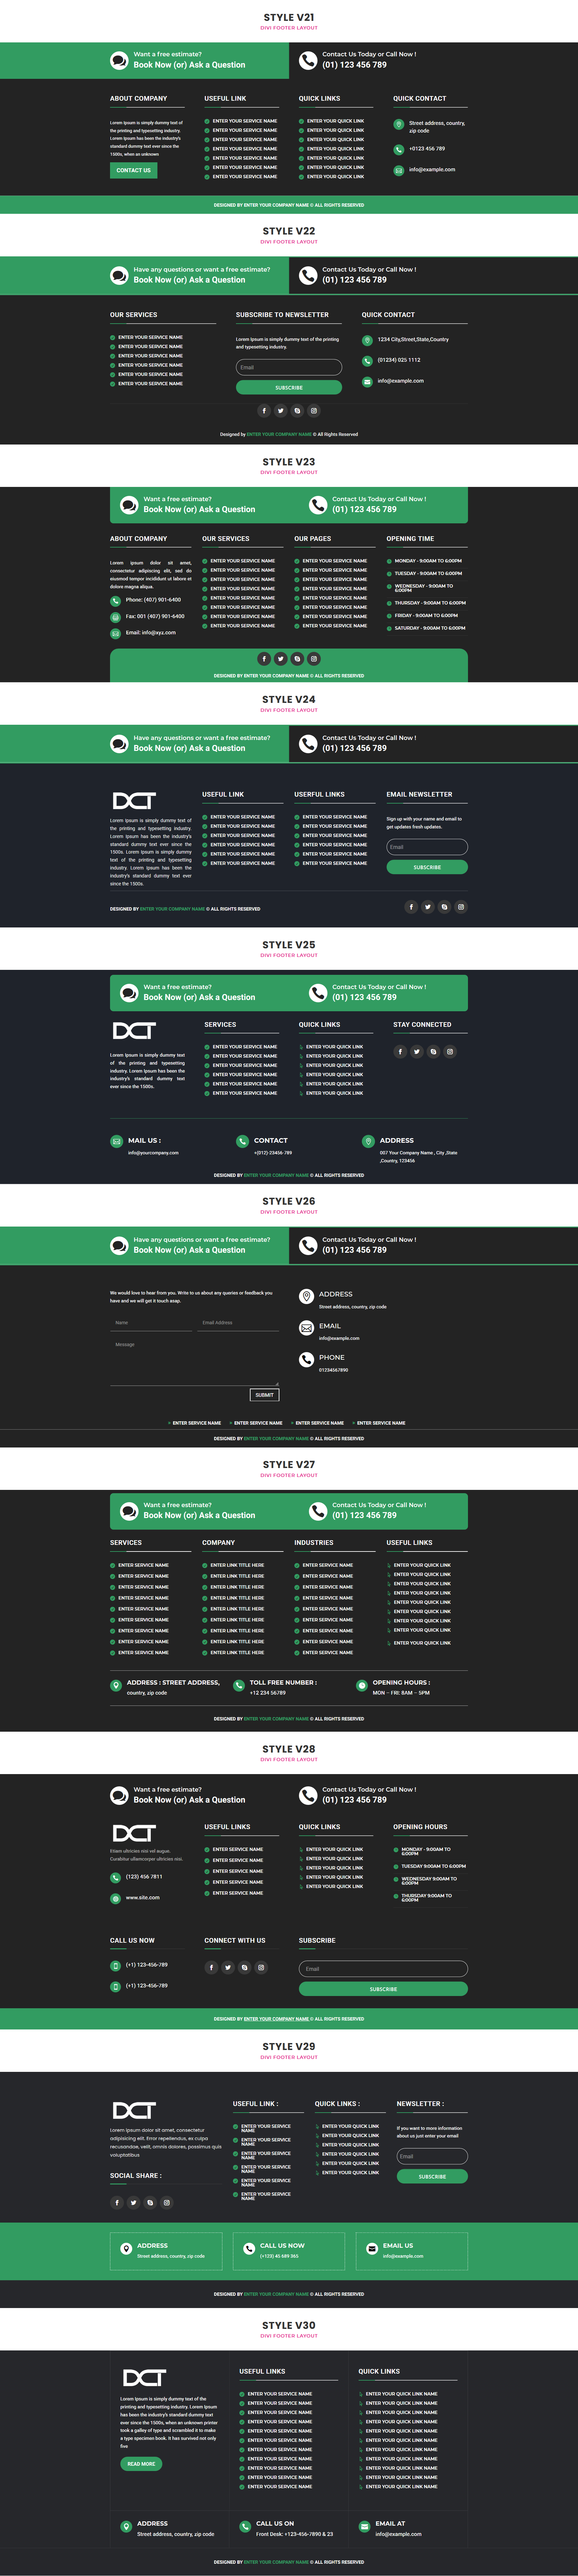 Divi Footer Sections Pack